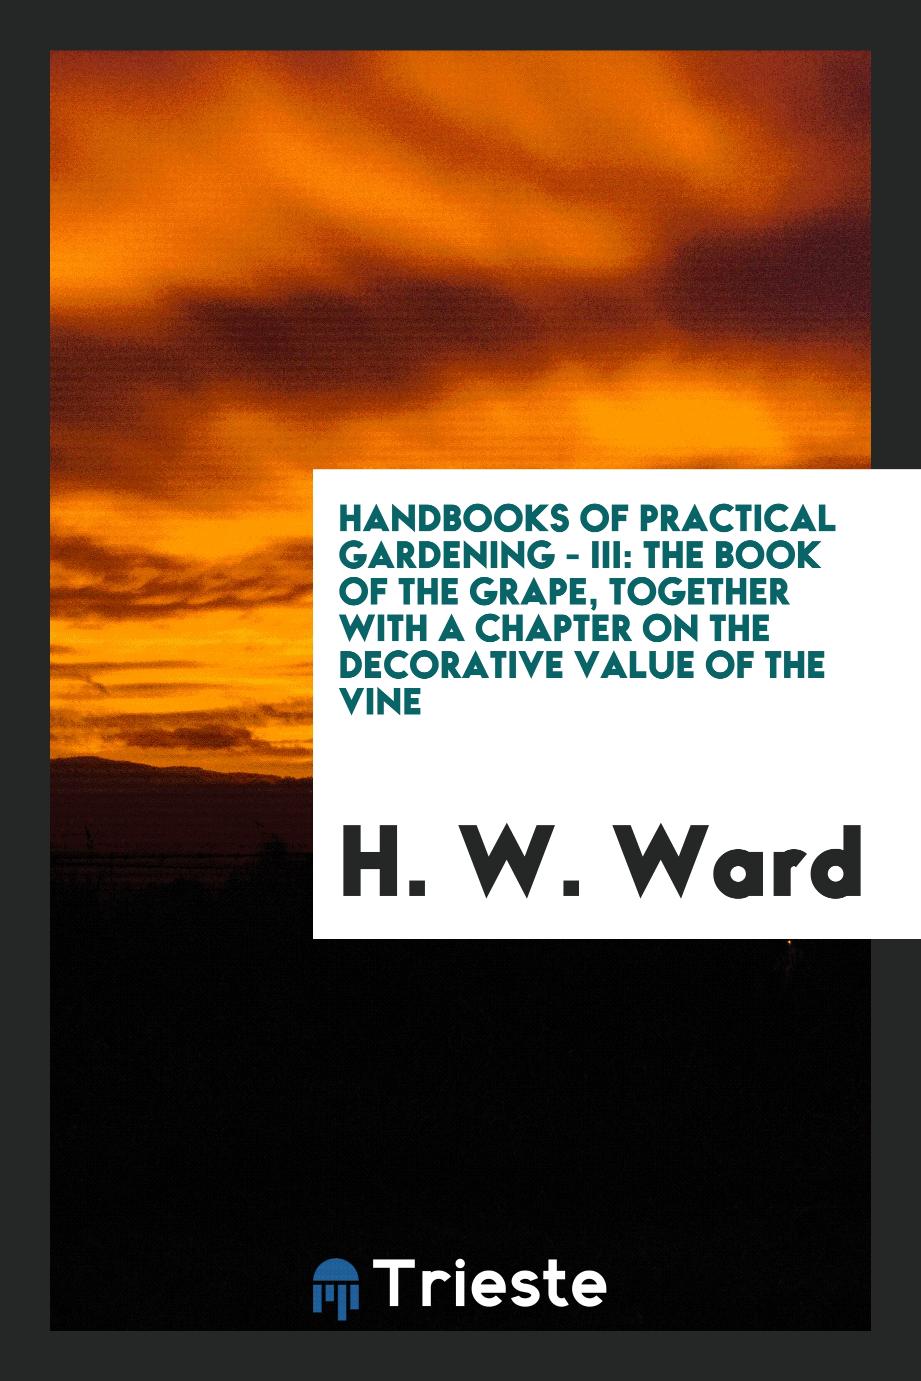 Handbooks of Practical Gardening - III: The Book of the Grape, Together with a Chapter on the Decorative Value of the Vine